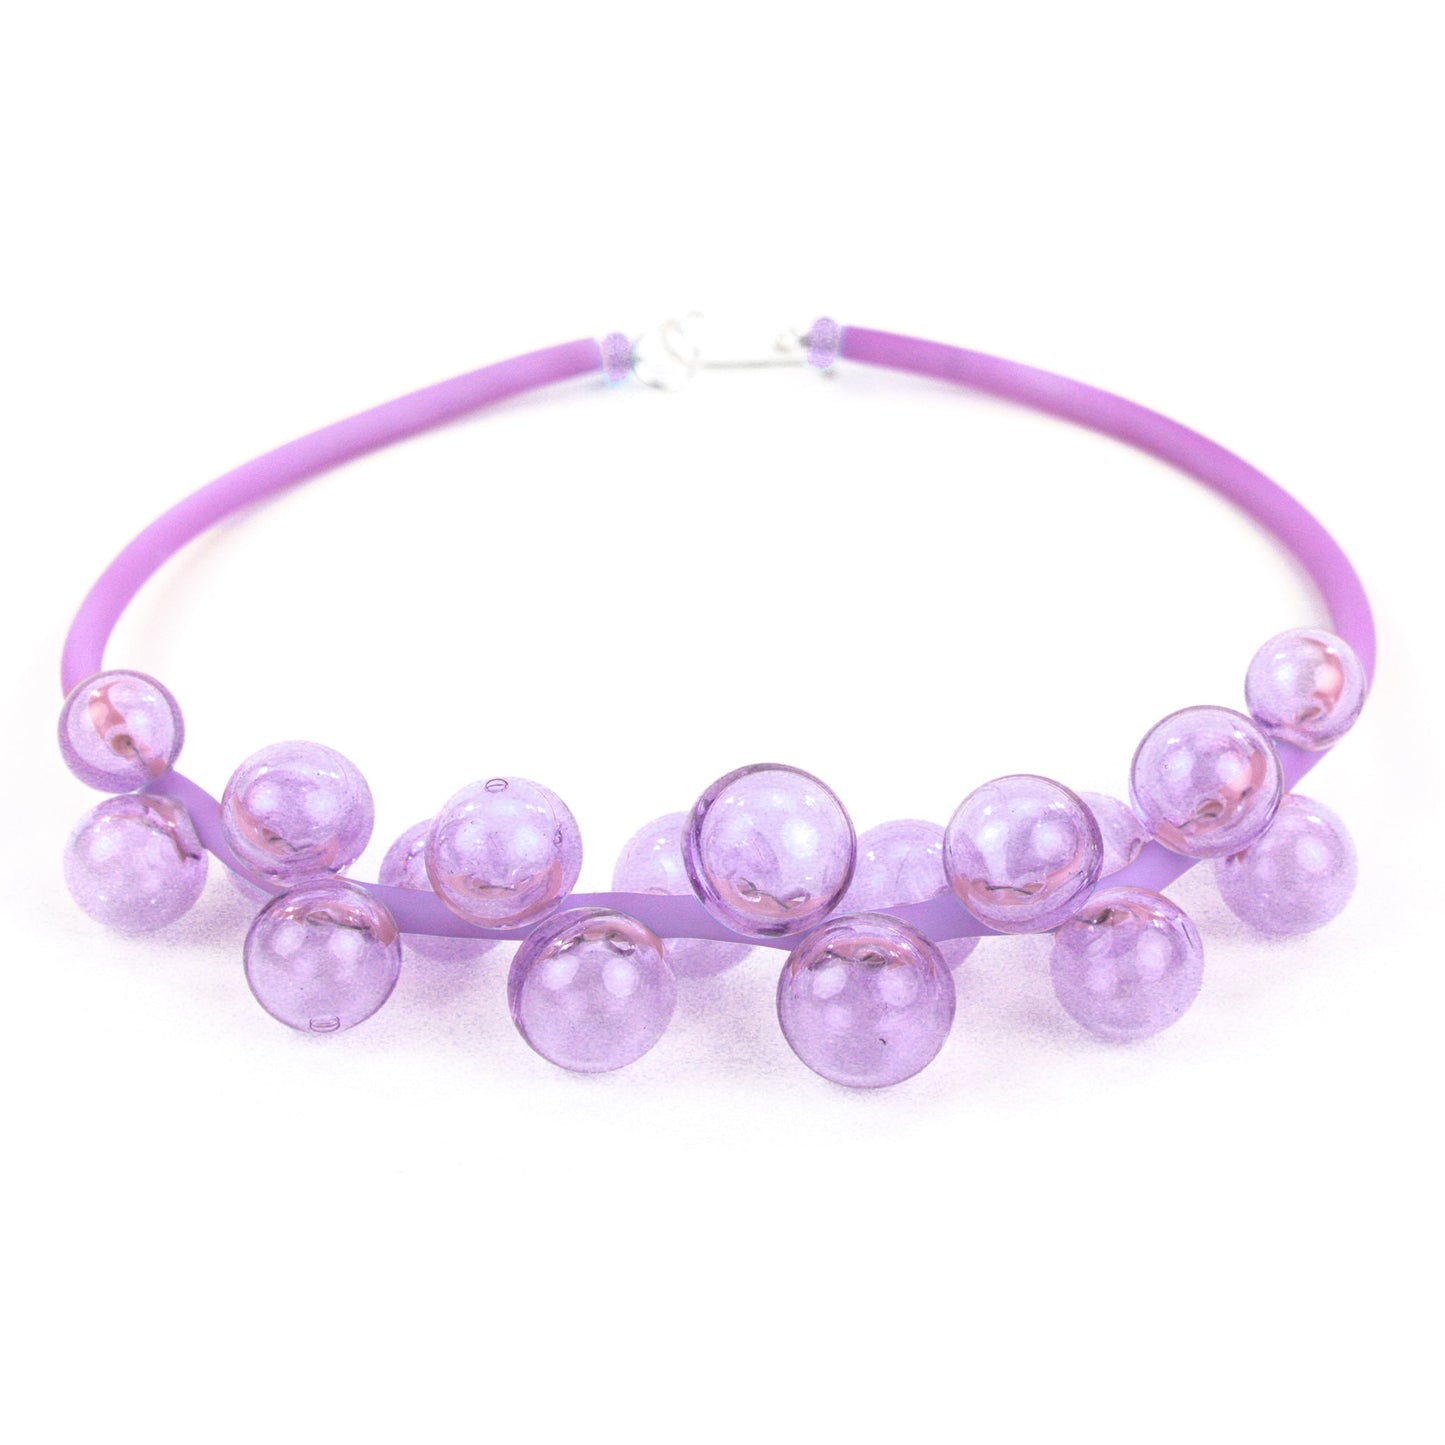 Chroma Bolla Necklace in Purple/Blue-Color changing